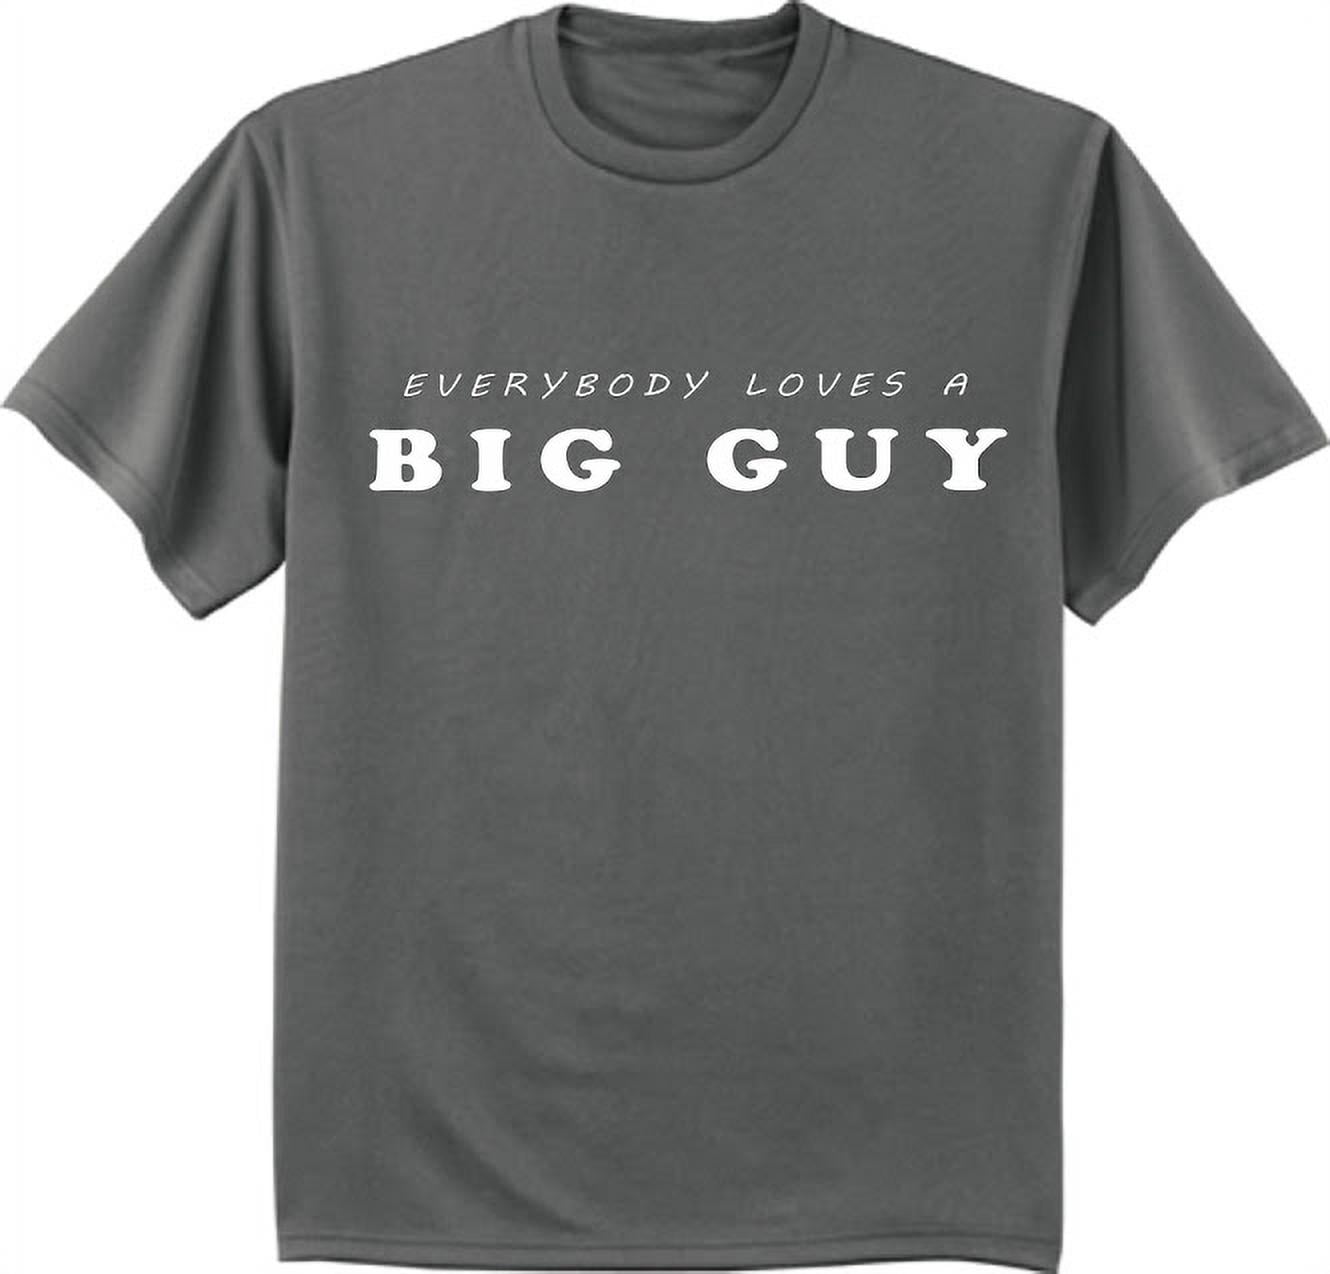 Everybody loves a big guy t-shirt Big and Tall tee for men 